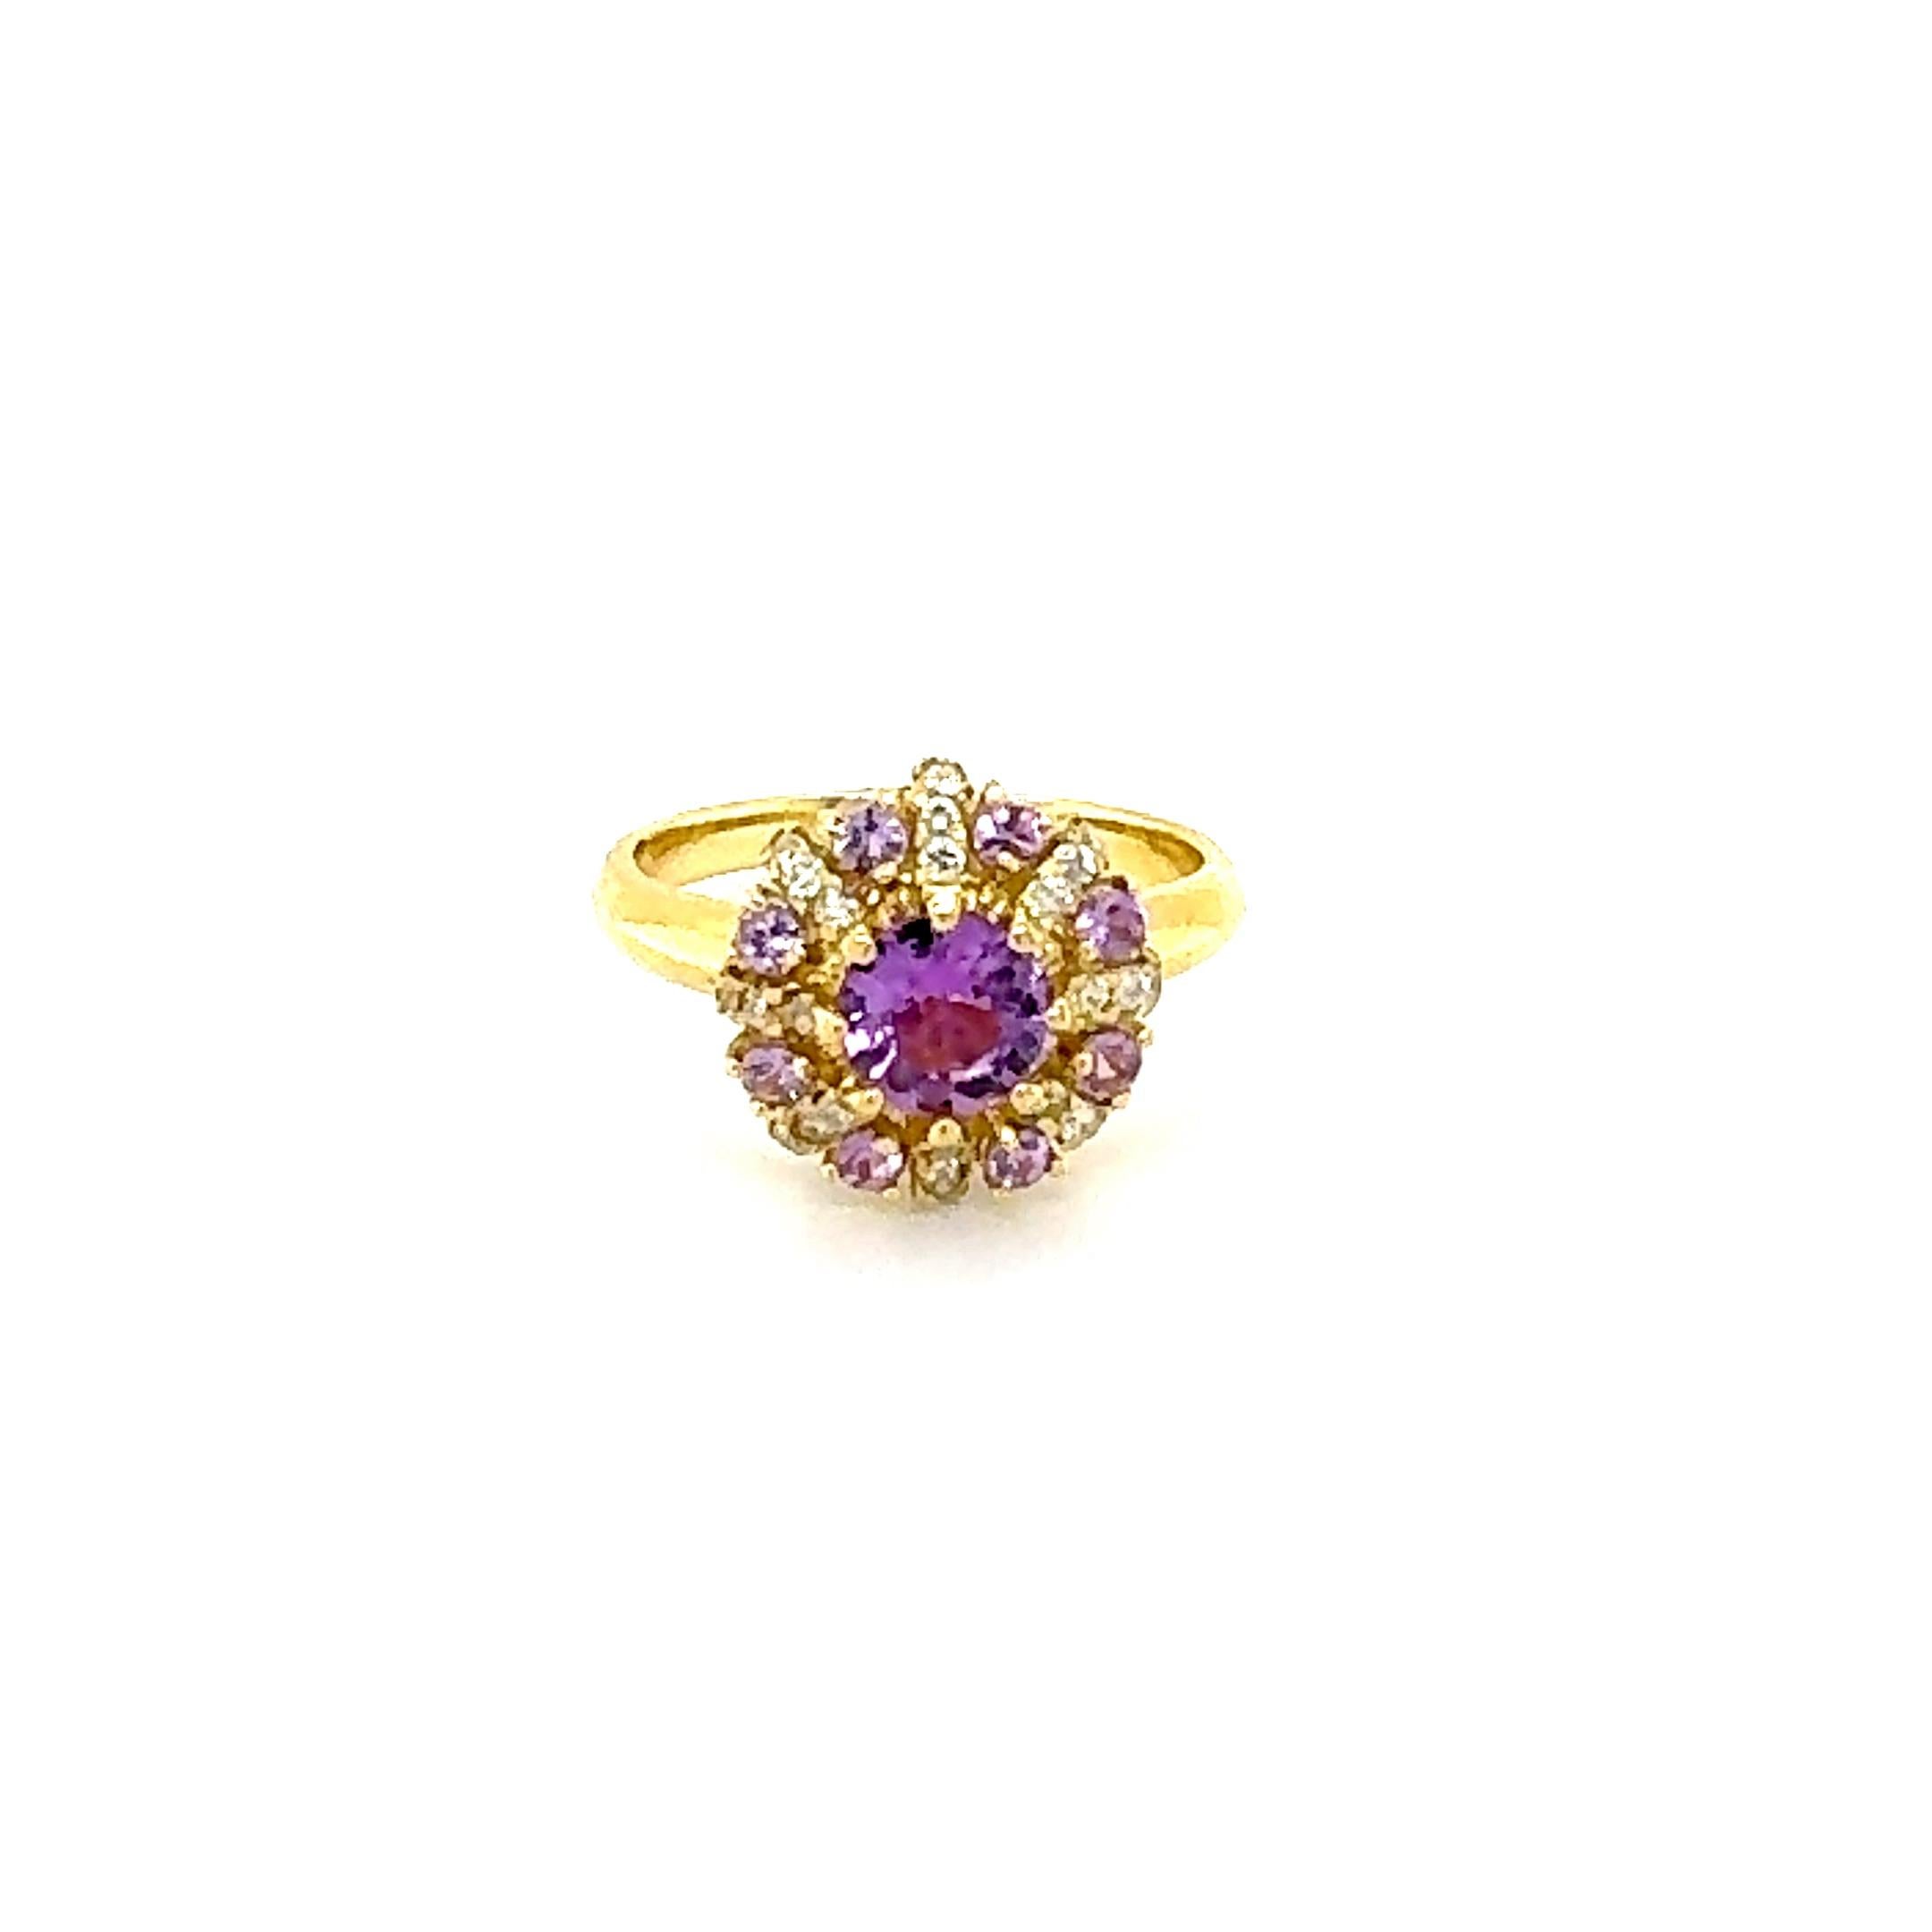 Contemporary 1.46 Carat GIA Certified Pink Sapphire Diamond Yellow Gold Ring For Sale